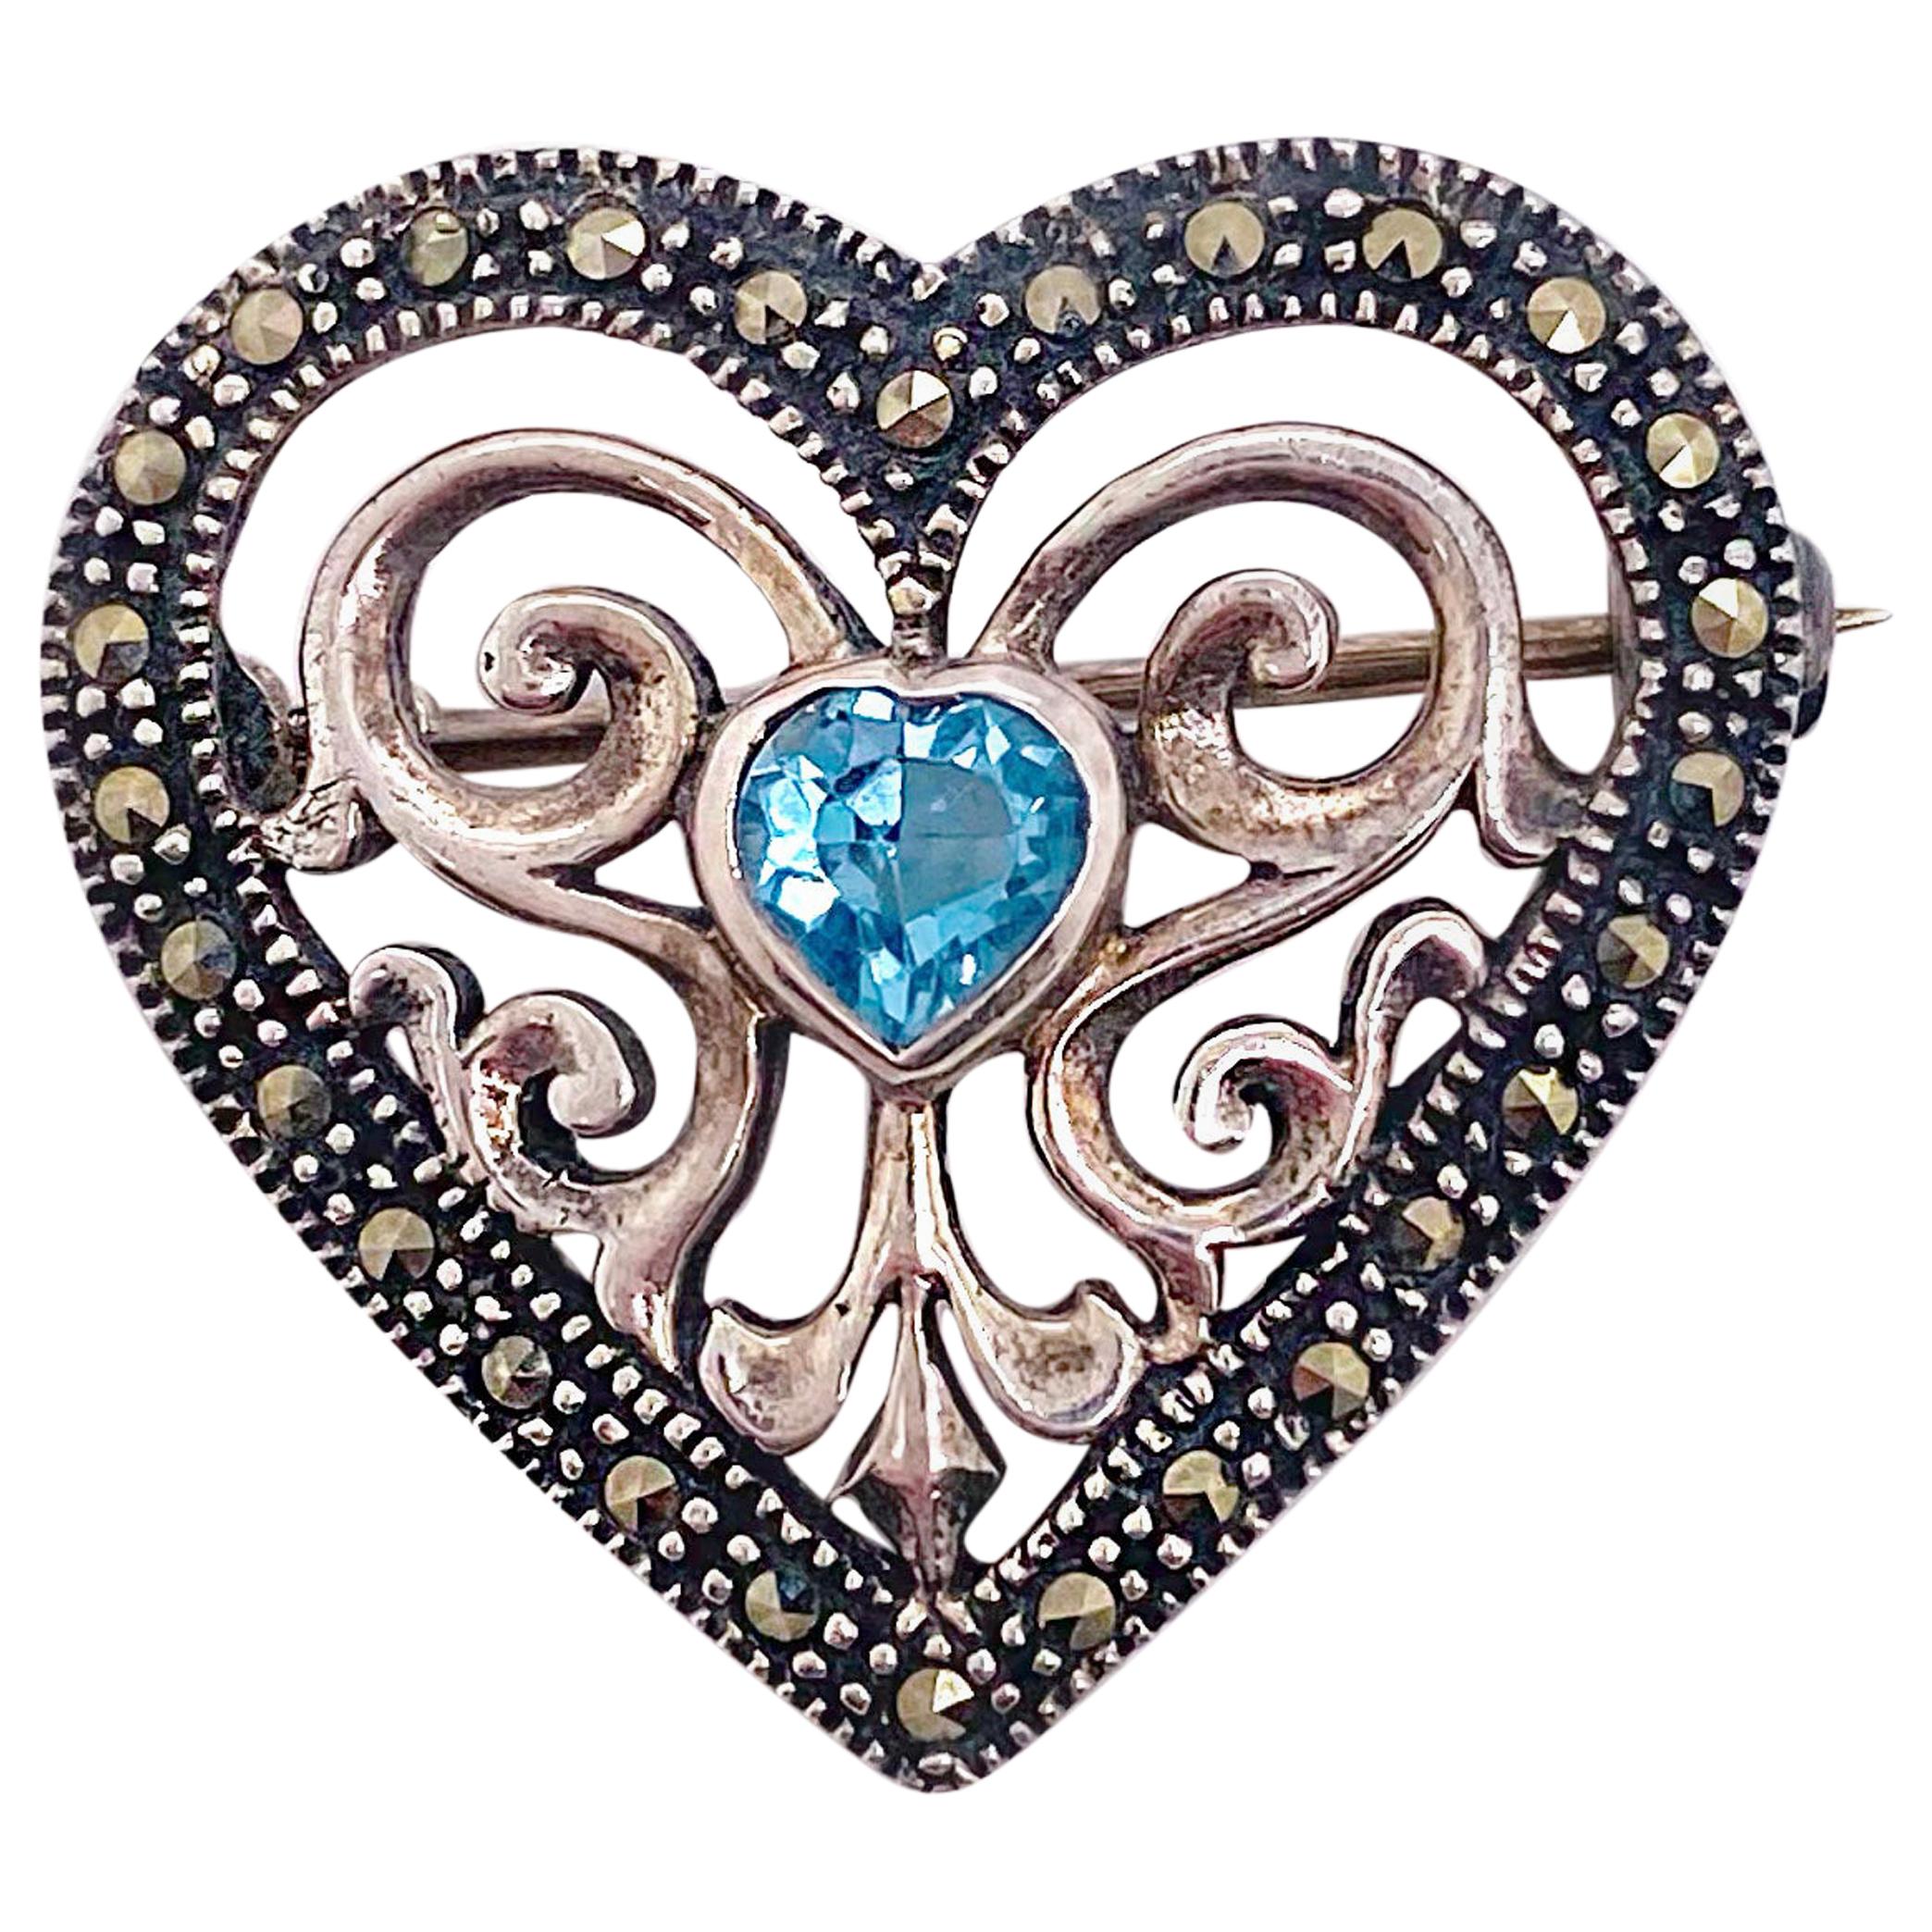 Topaz Heart Brooch in Sterling Silver with Blue Topaz and Heart